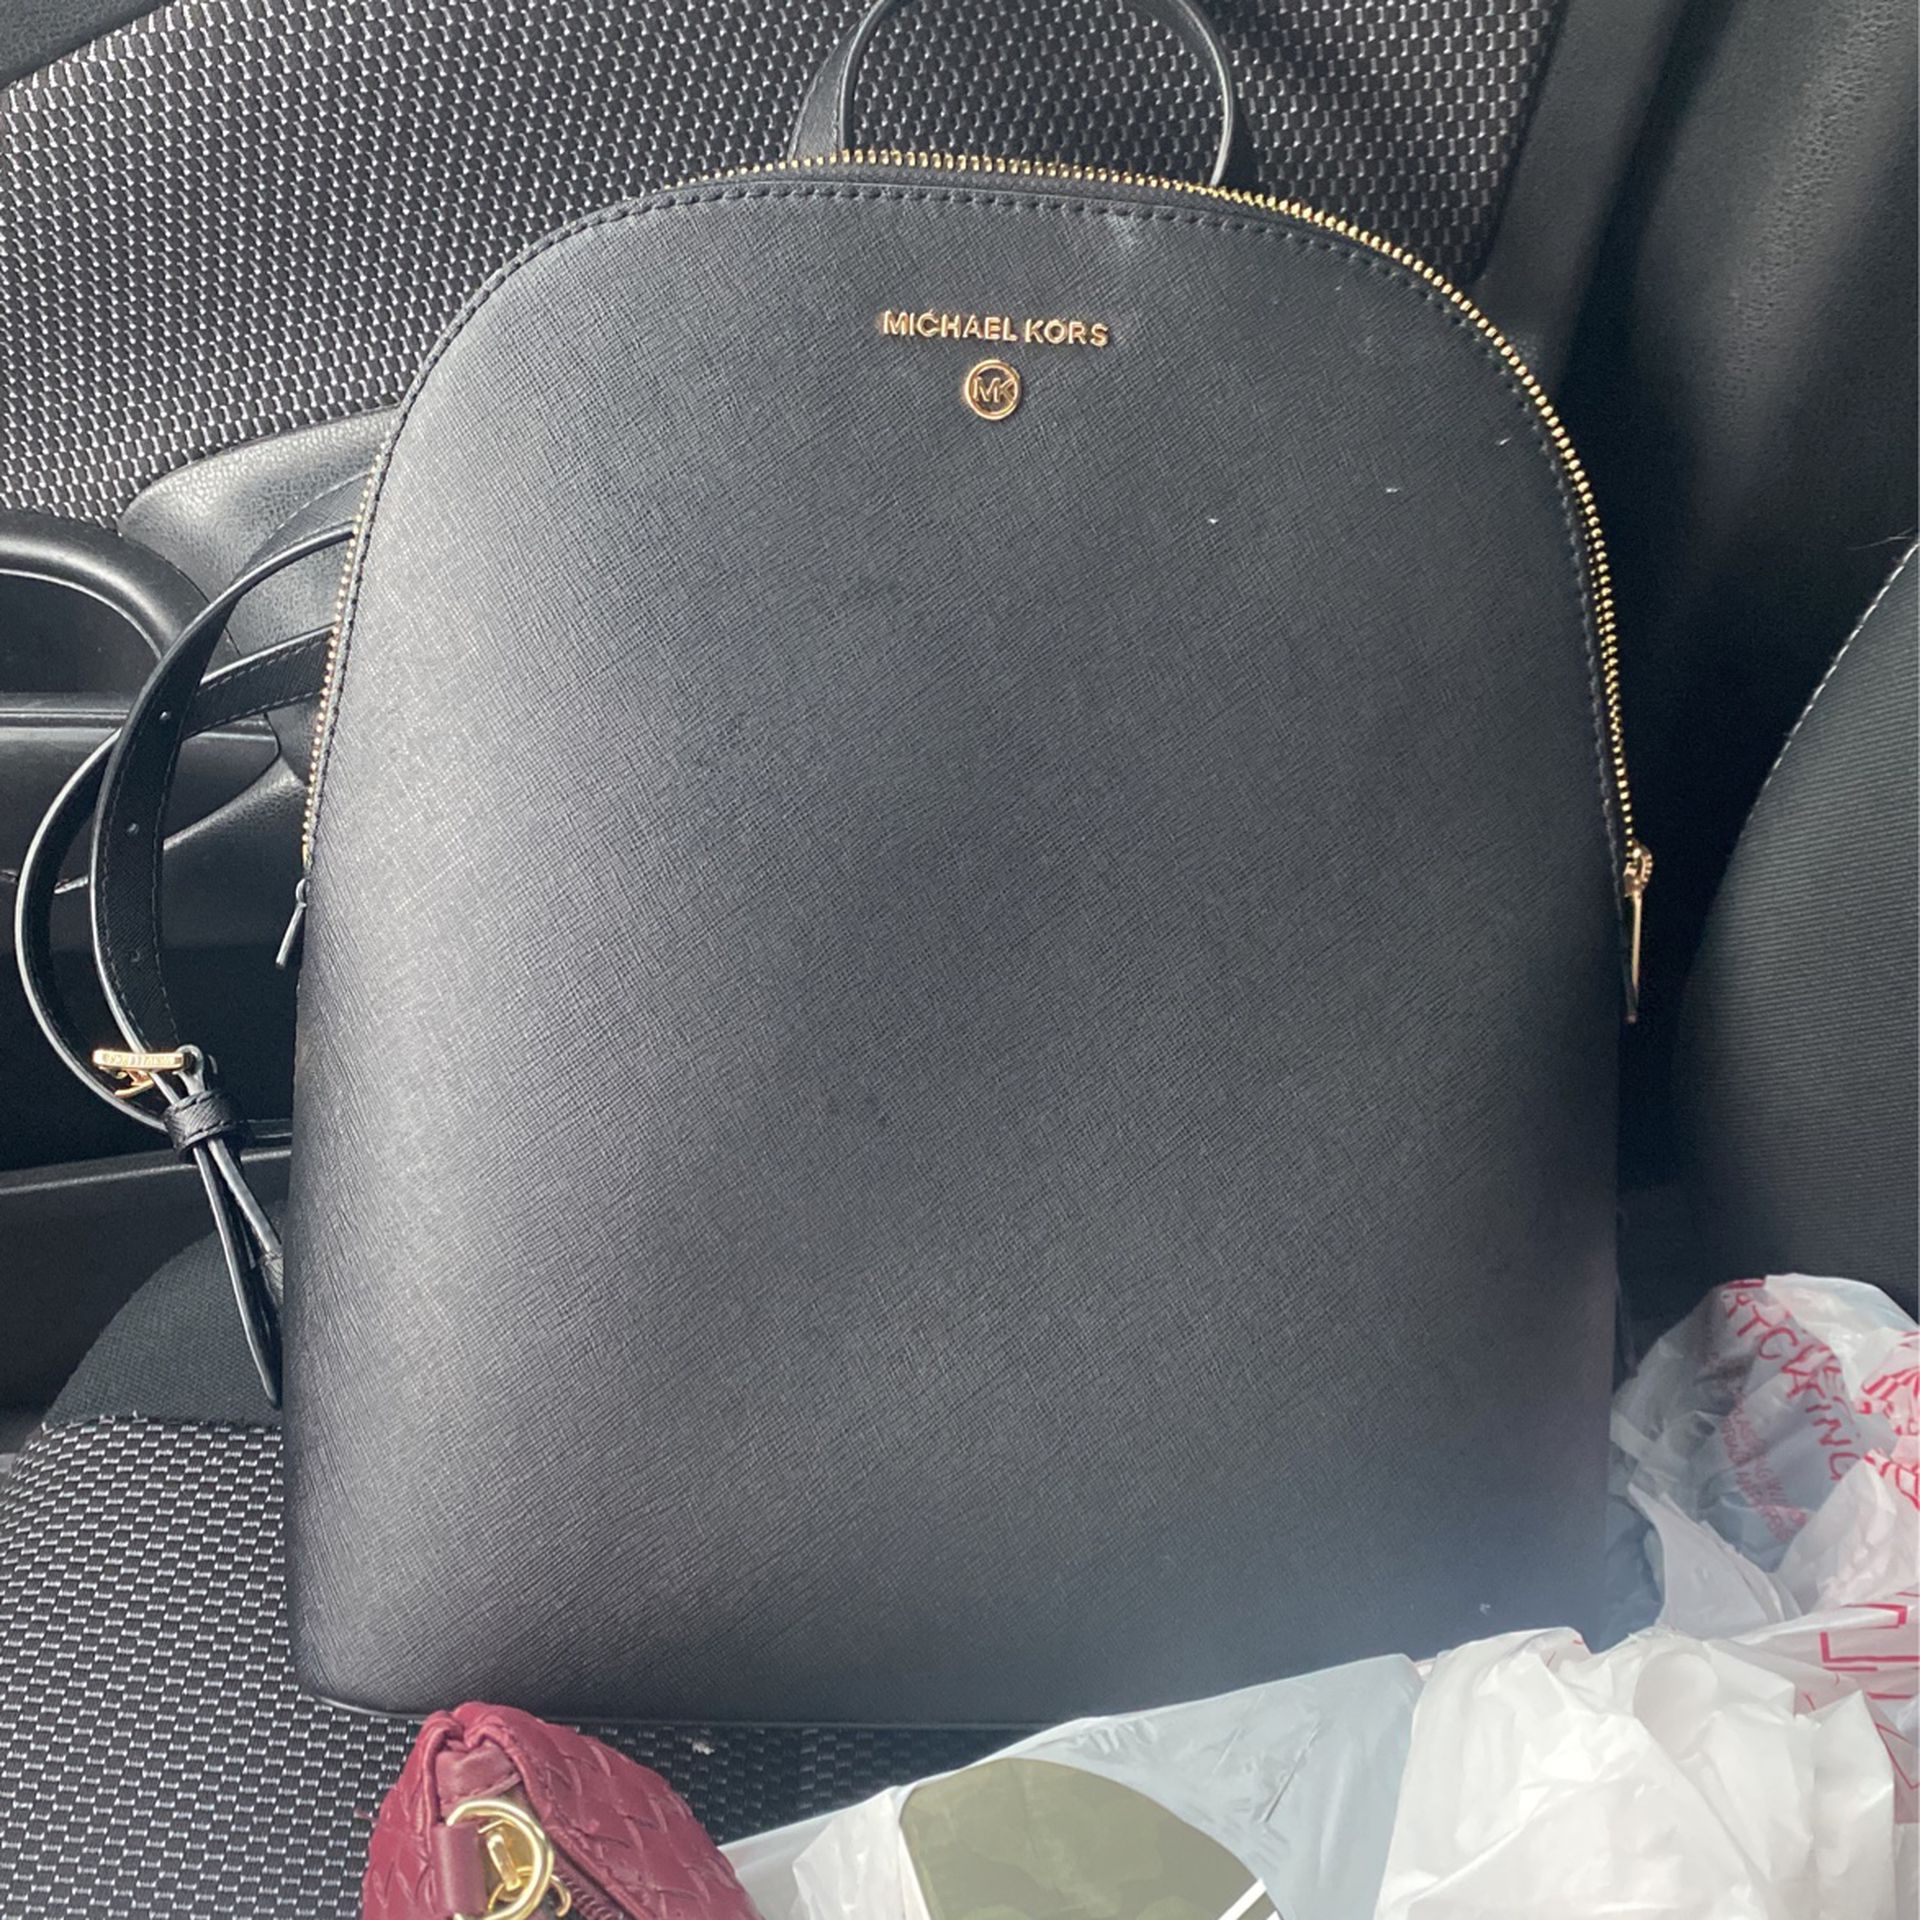 MK Black Back Purse Real And Serial Number Is Inside